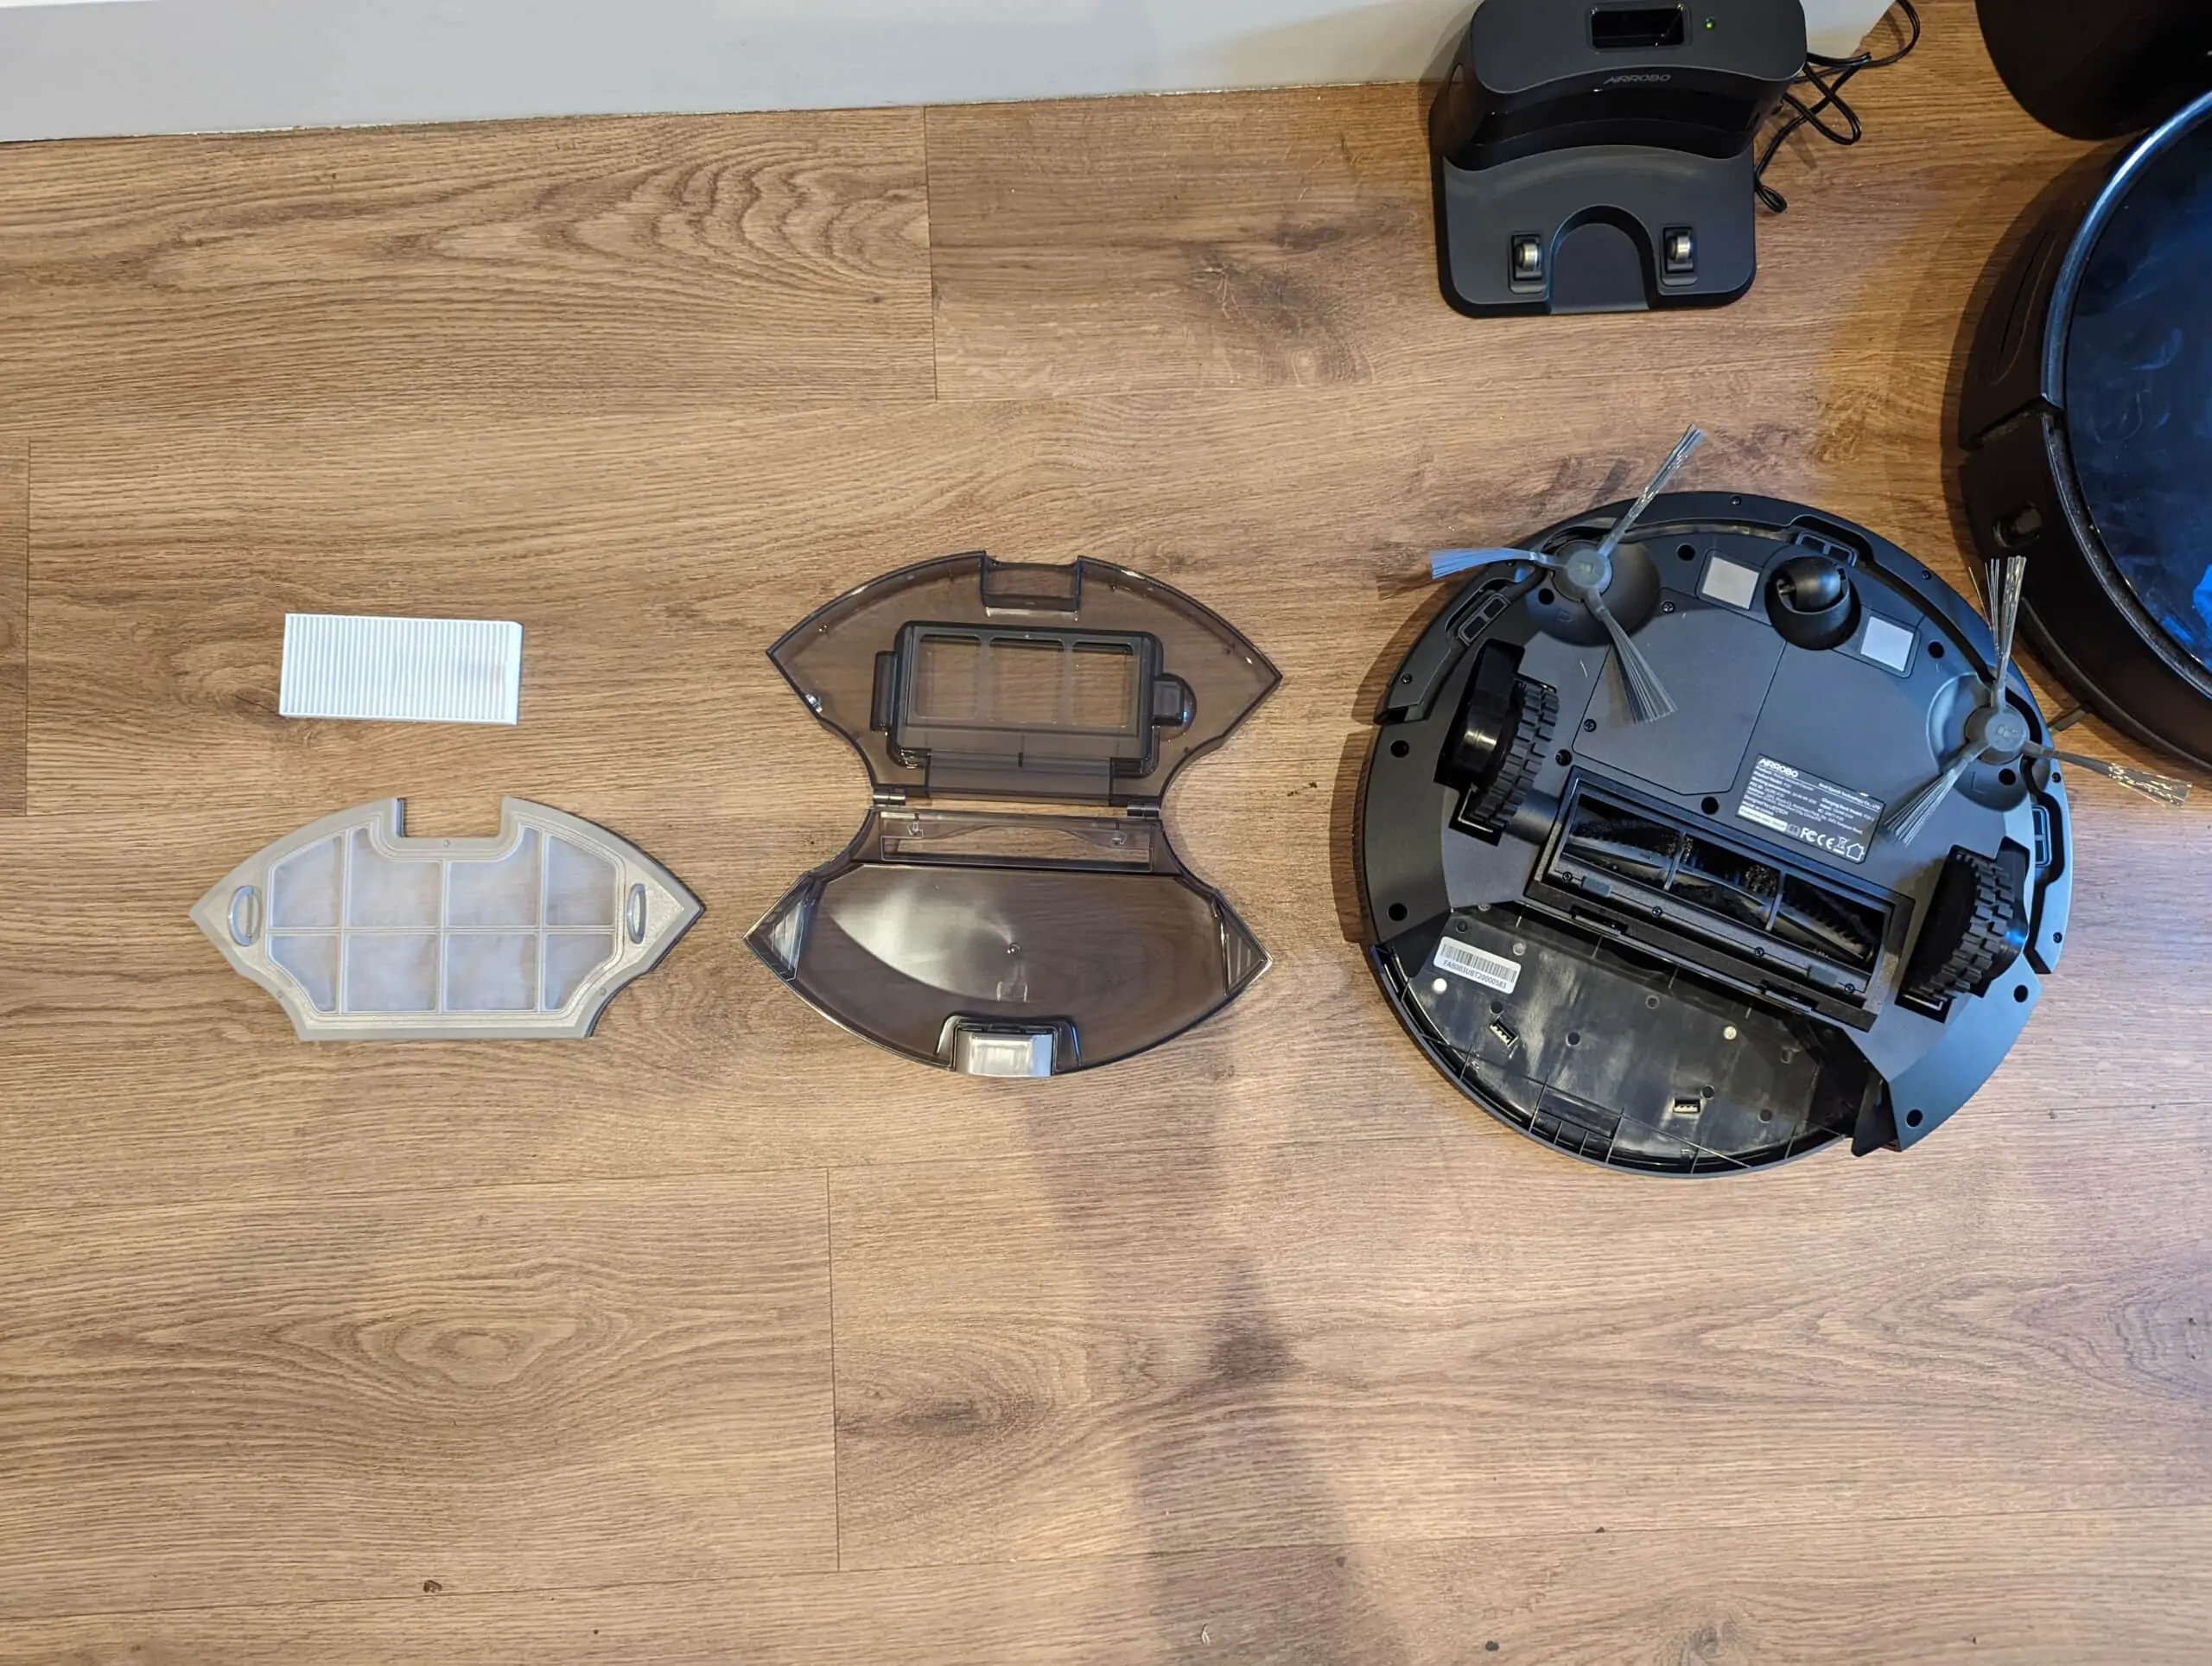 AIRROBO P20 Robot Vacuum Review5 scaled - AIRROBO P20 Robot Vacuum Review – A budget option with gyroscope navigation & improved cleaning vs P10